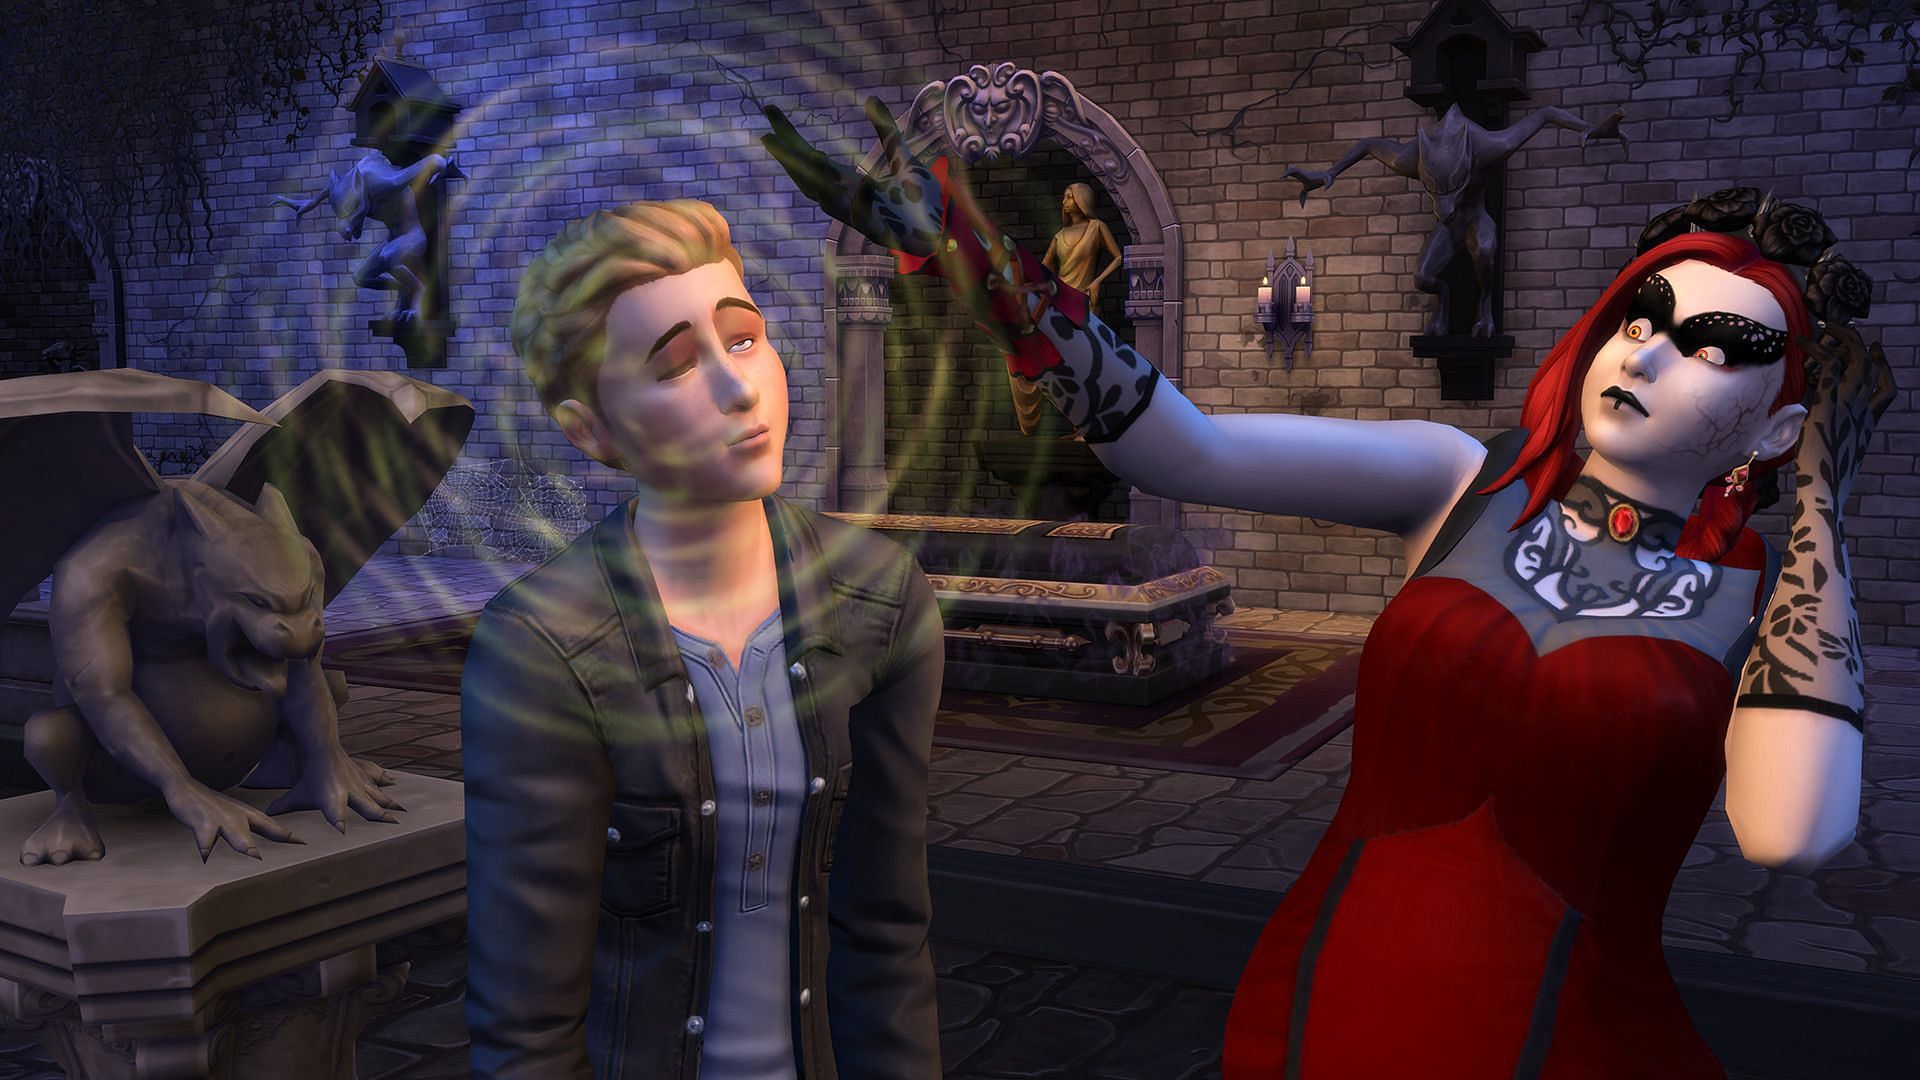 Occult packs are one of the more popular gameplay features in Sims 4 (Image via Electronic Arts)